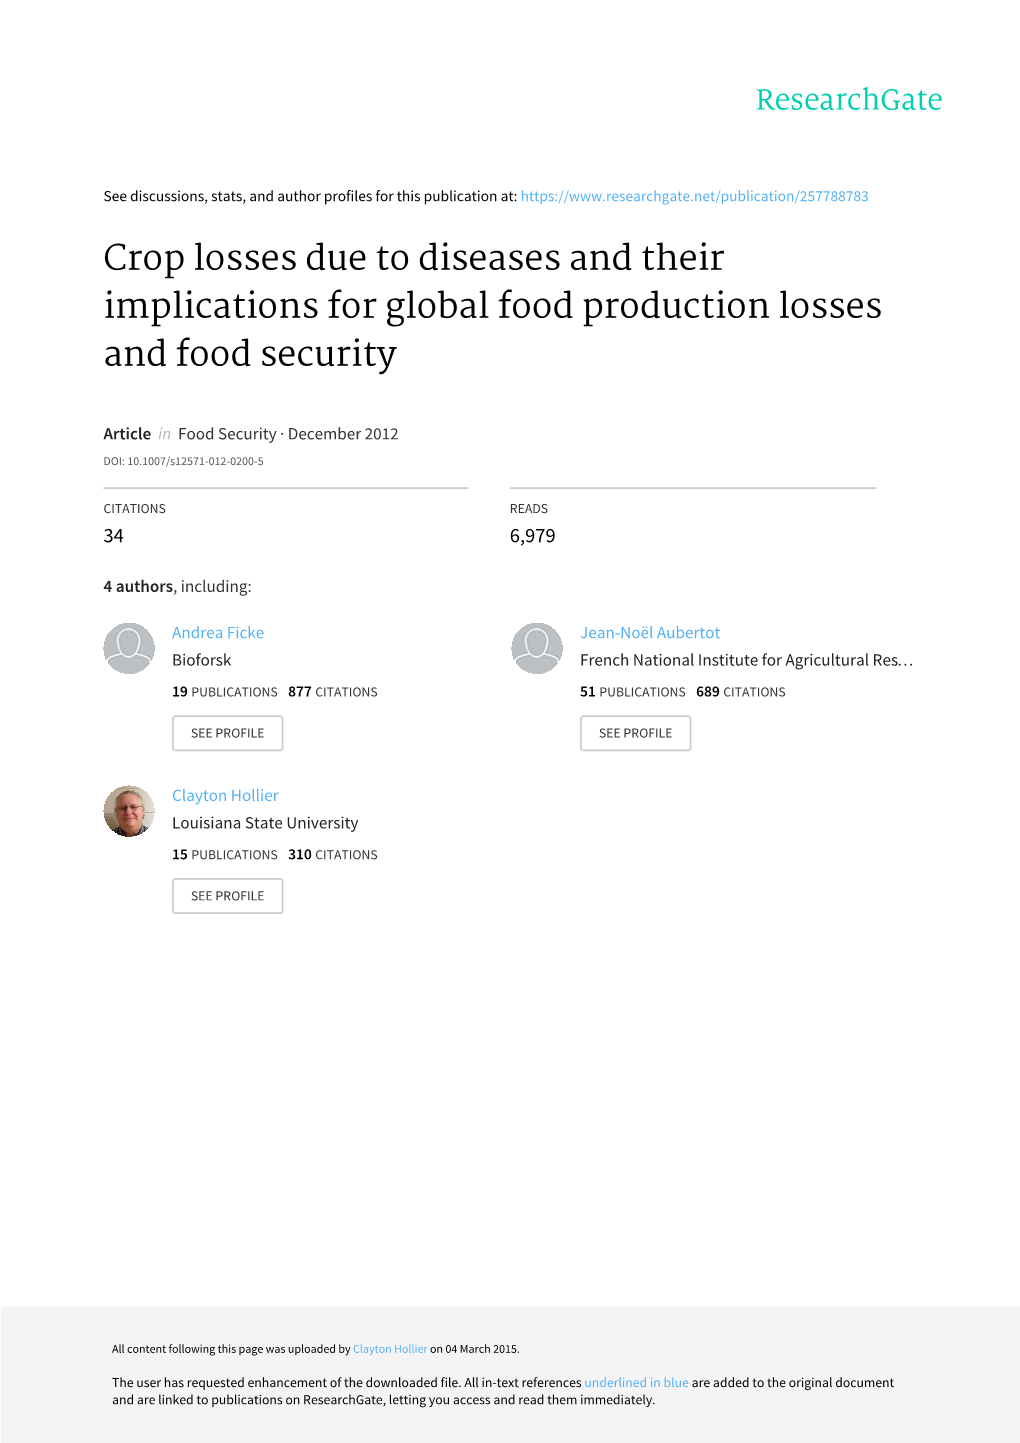 Crop Losses Due to Diseases and Their Implications for Global Food Production Losses and Food Security